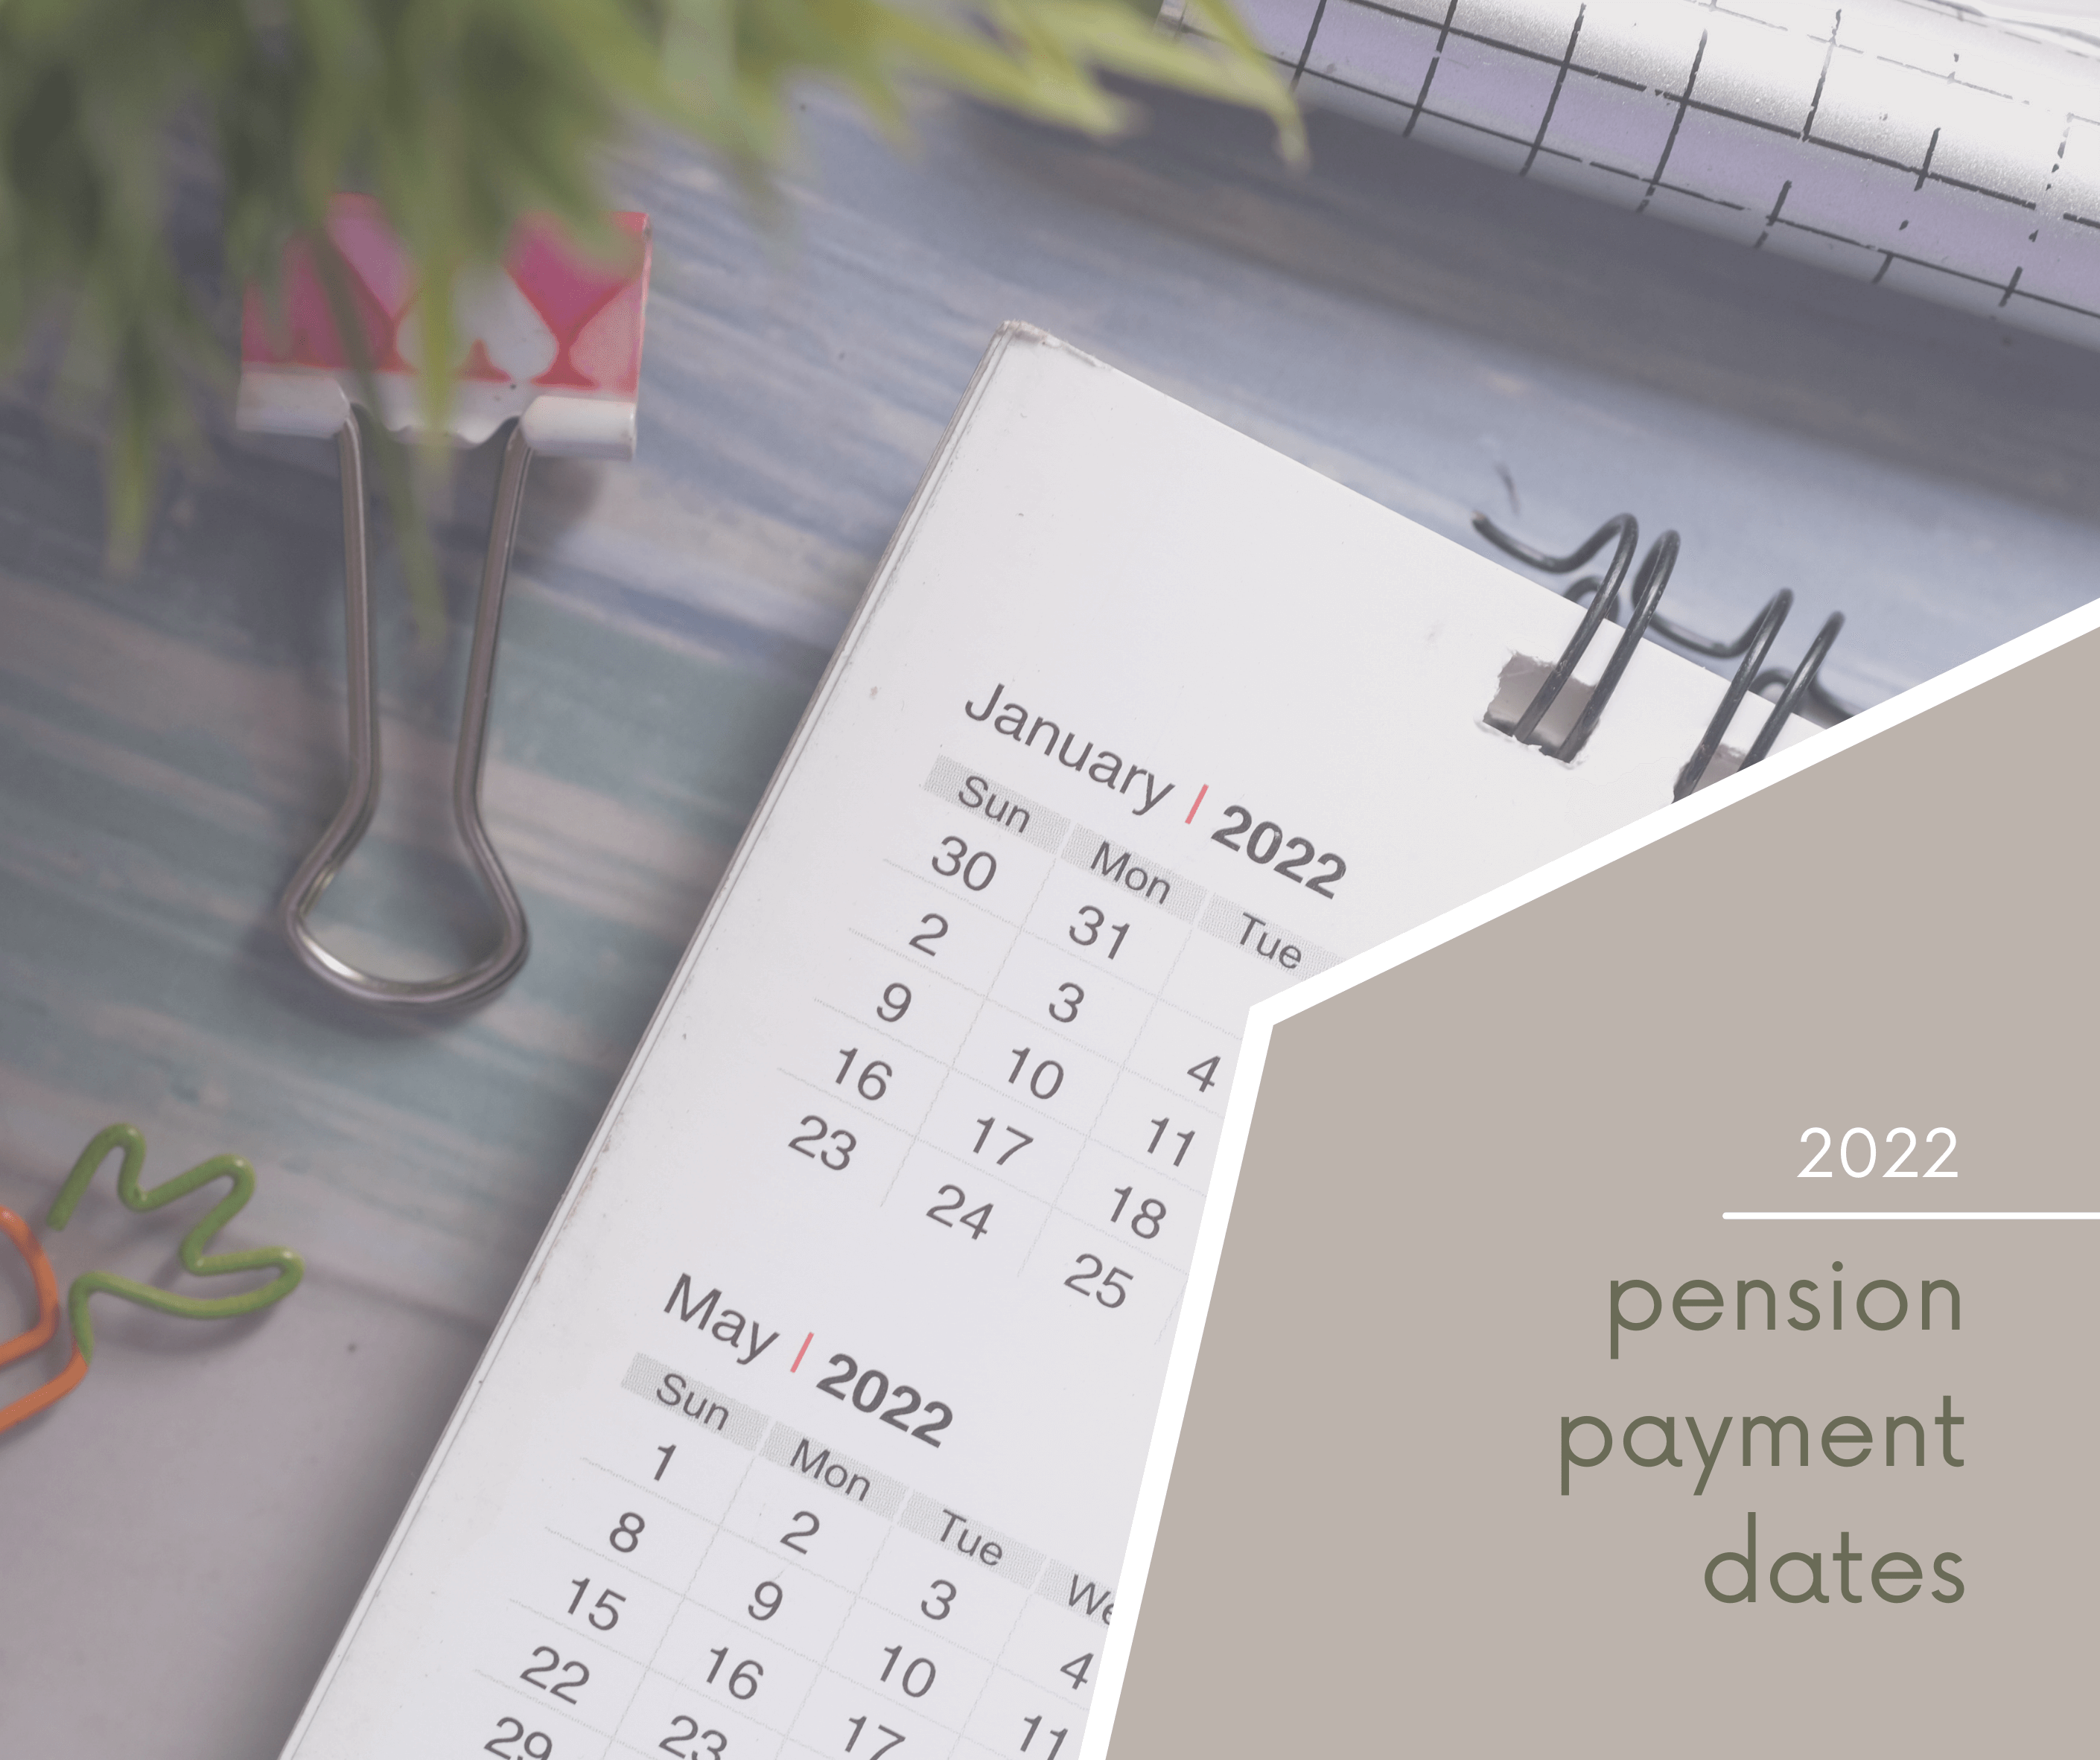 2022 Pension Payment Dates Gemma Know, Plan, Act.